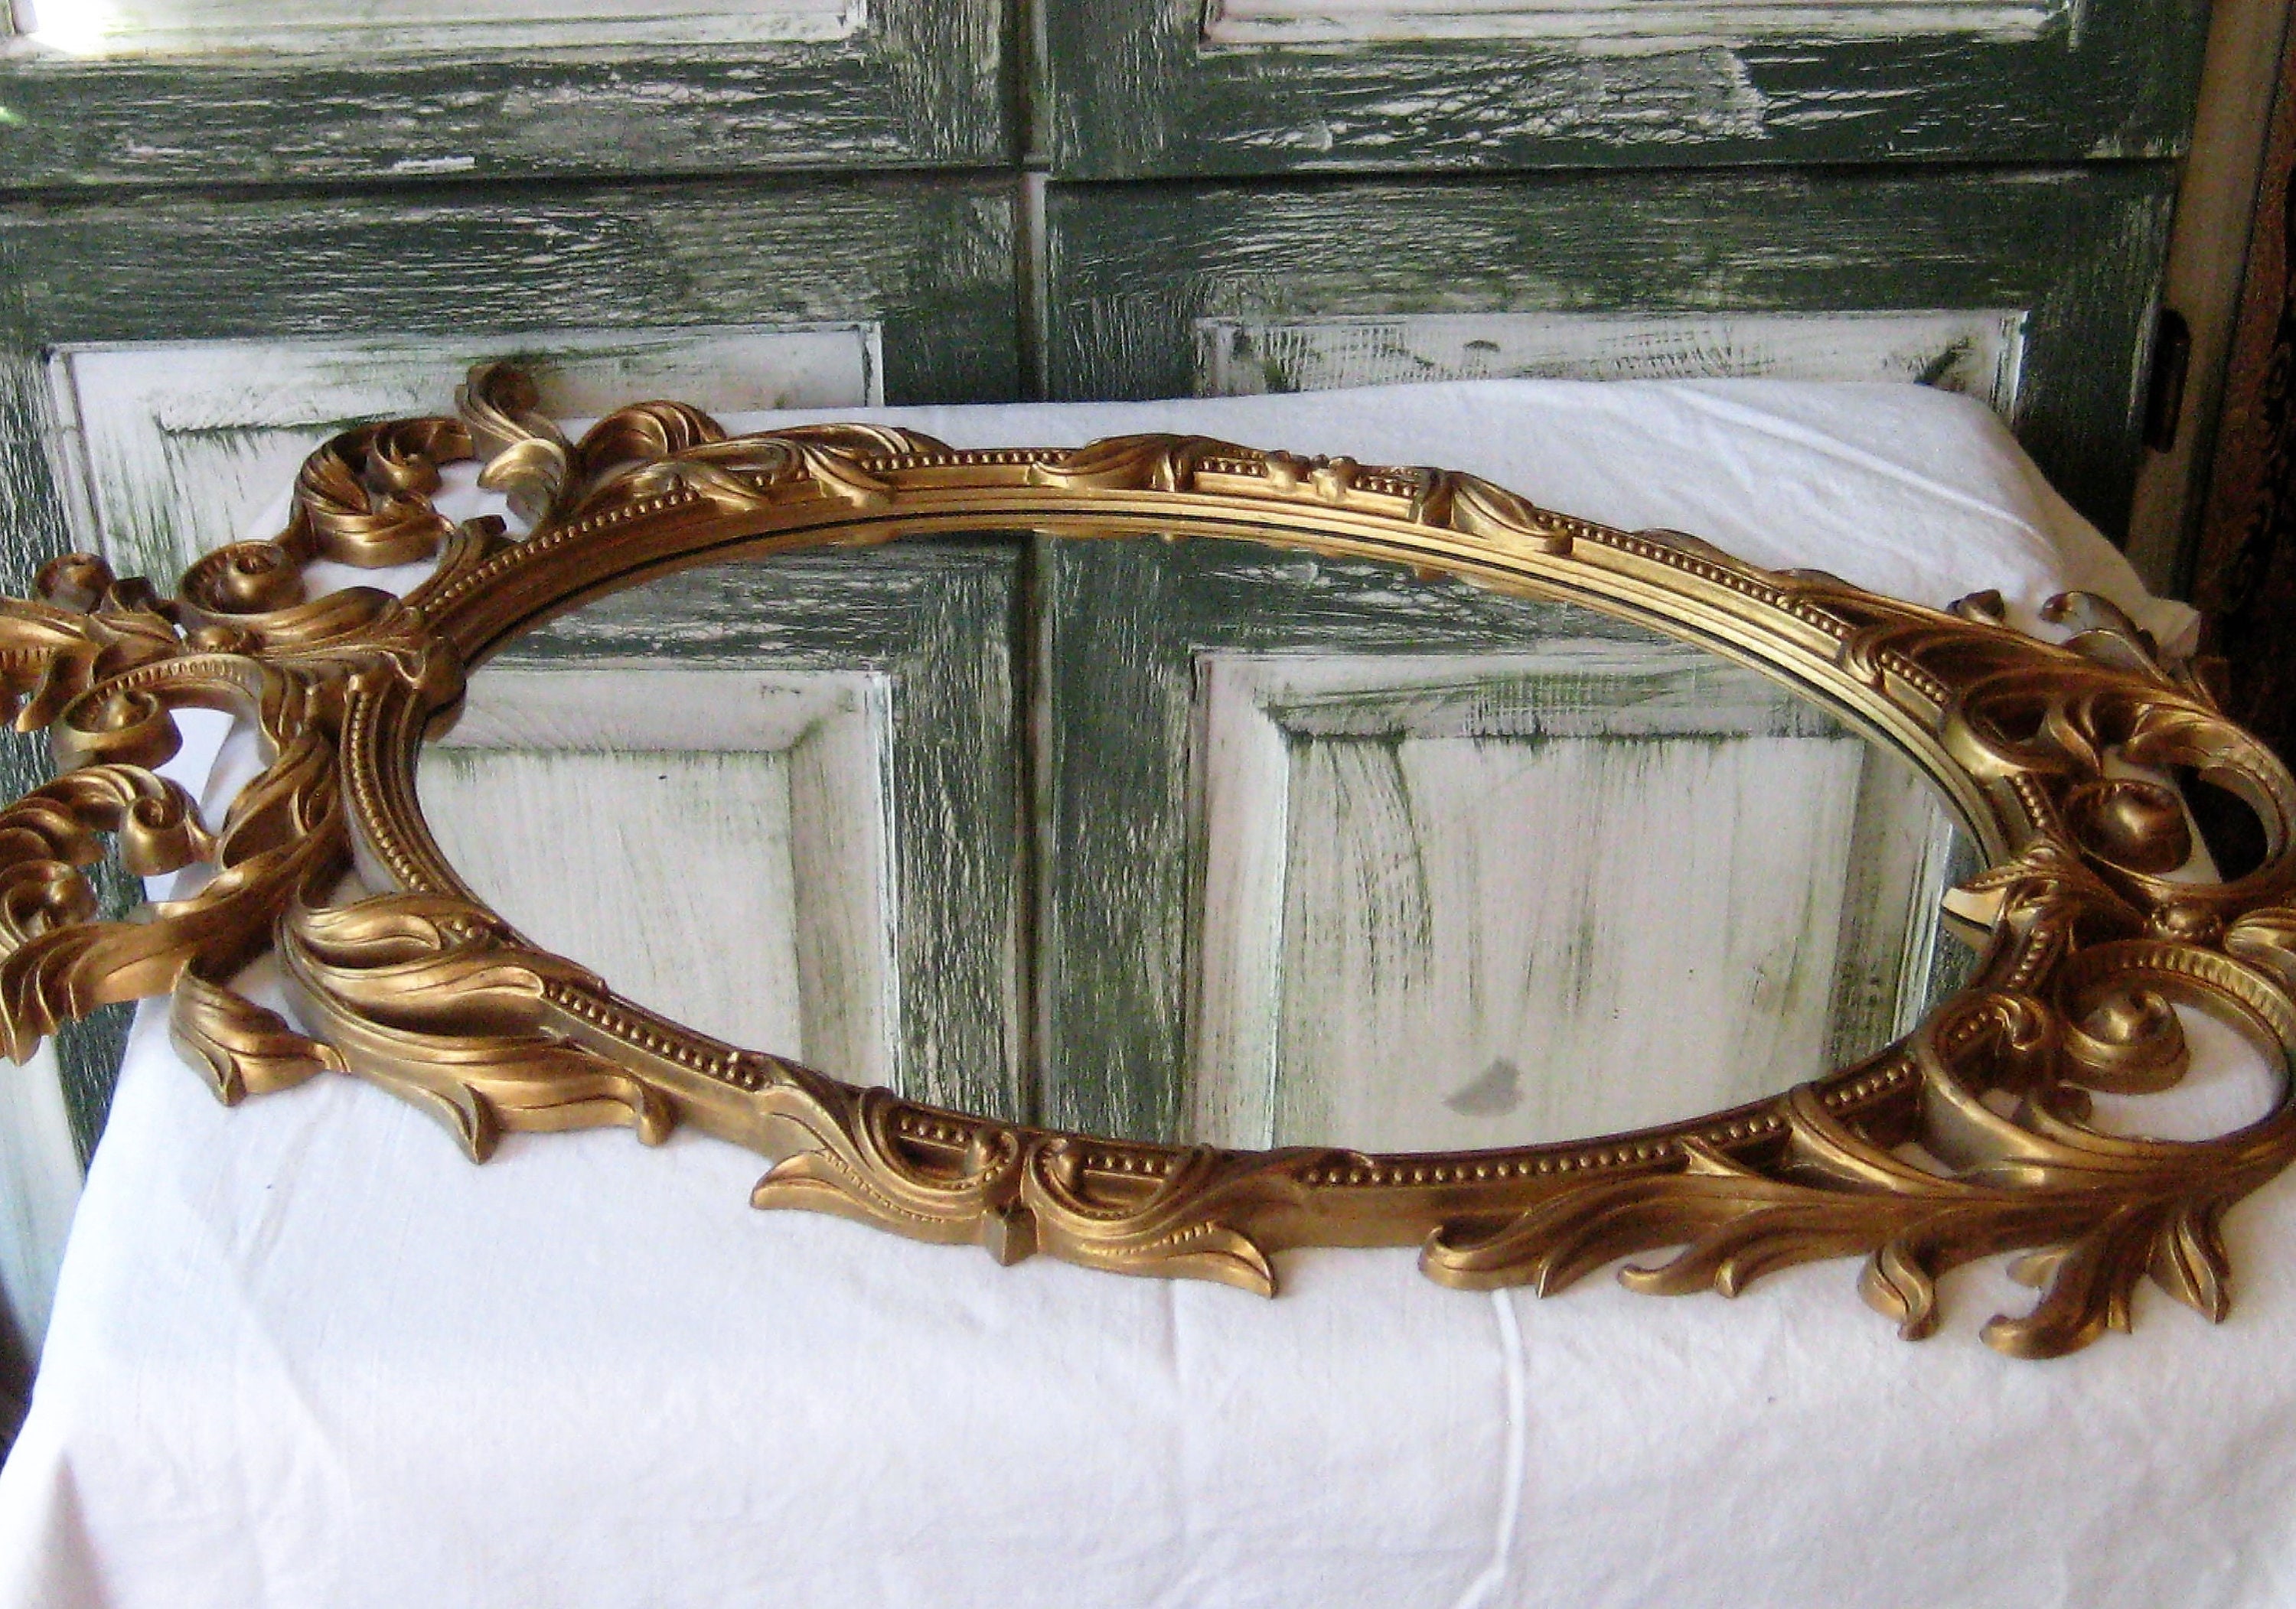 Sale Mid-Century GOLD SYROCO Round Oval Mirror Frame Flowers -  Portugal